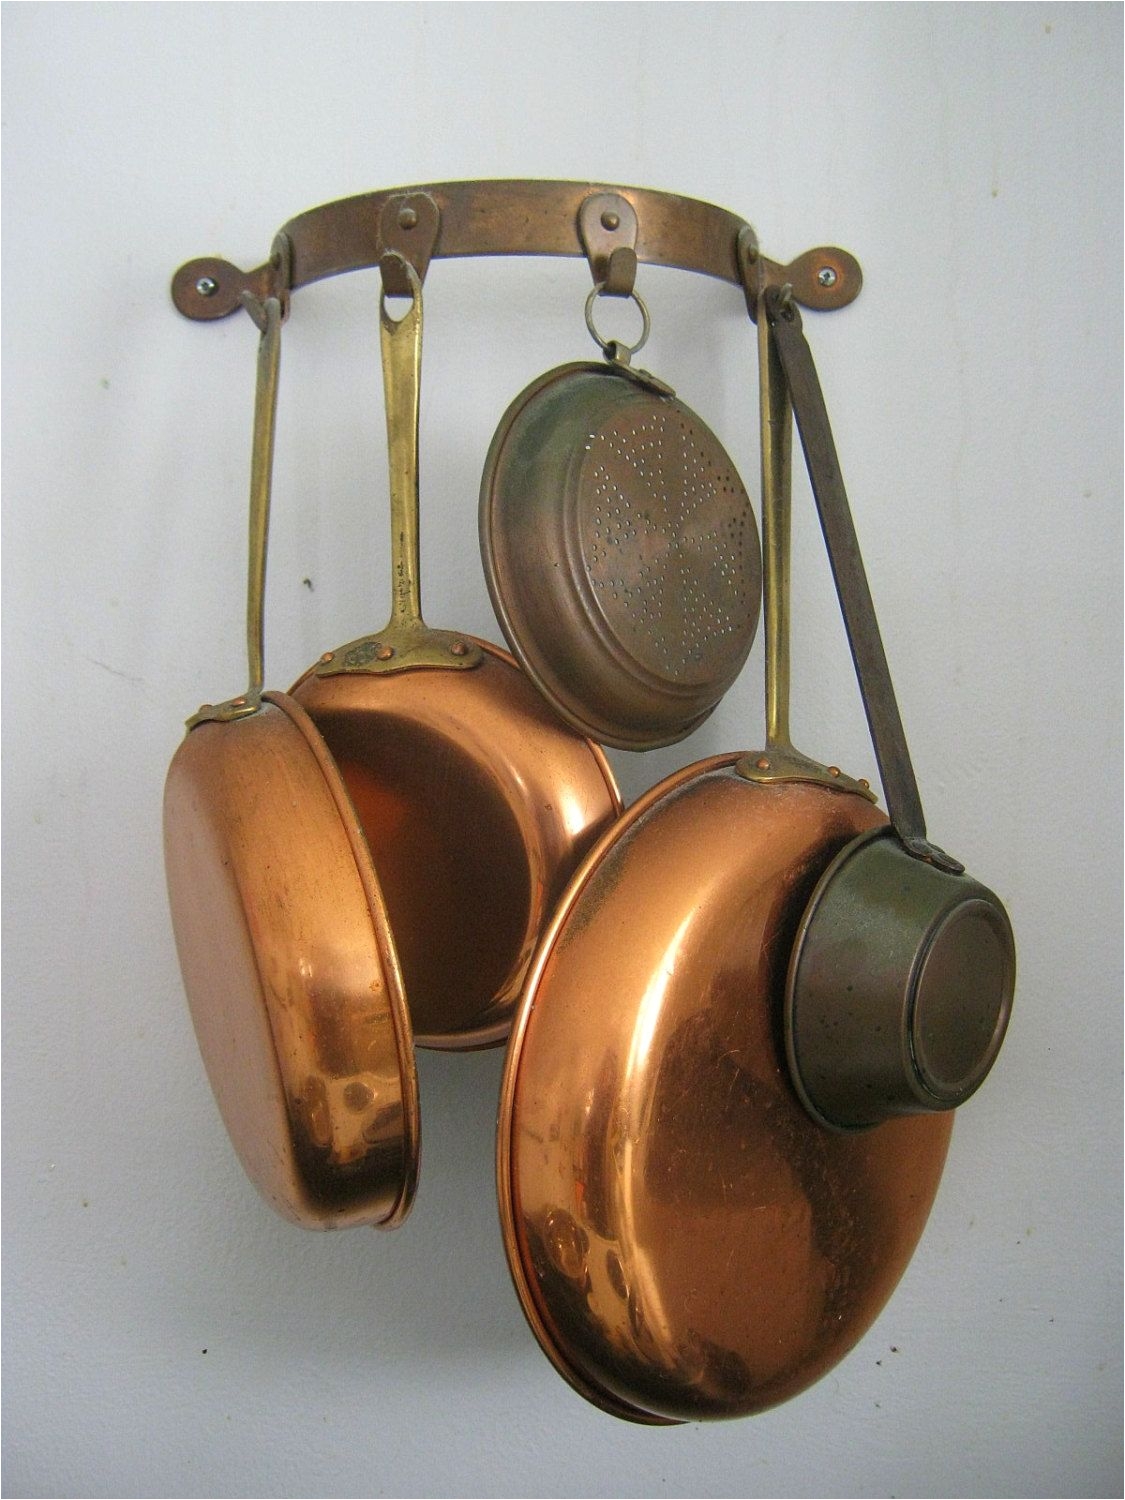 How to Clean Decorative Copper Pots Vintage Copper Pot Rack This is A Half Moon Style Designed to Hang